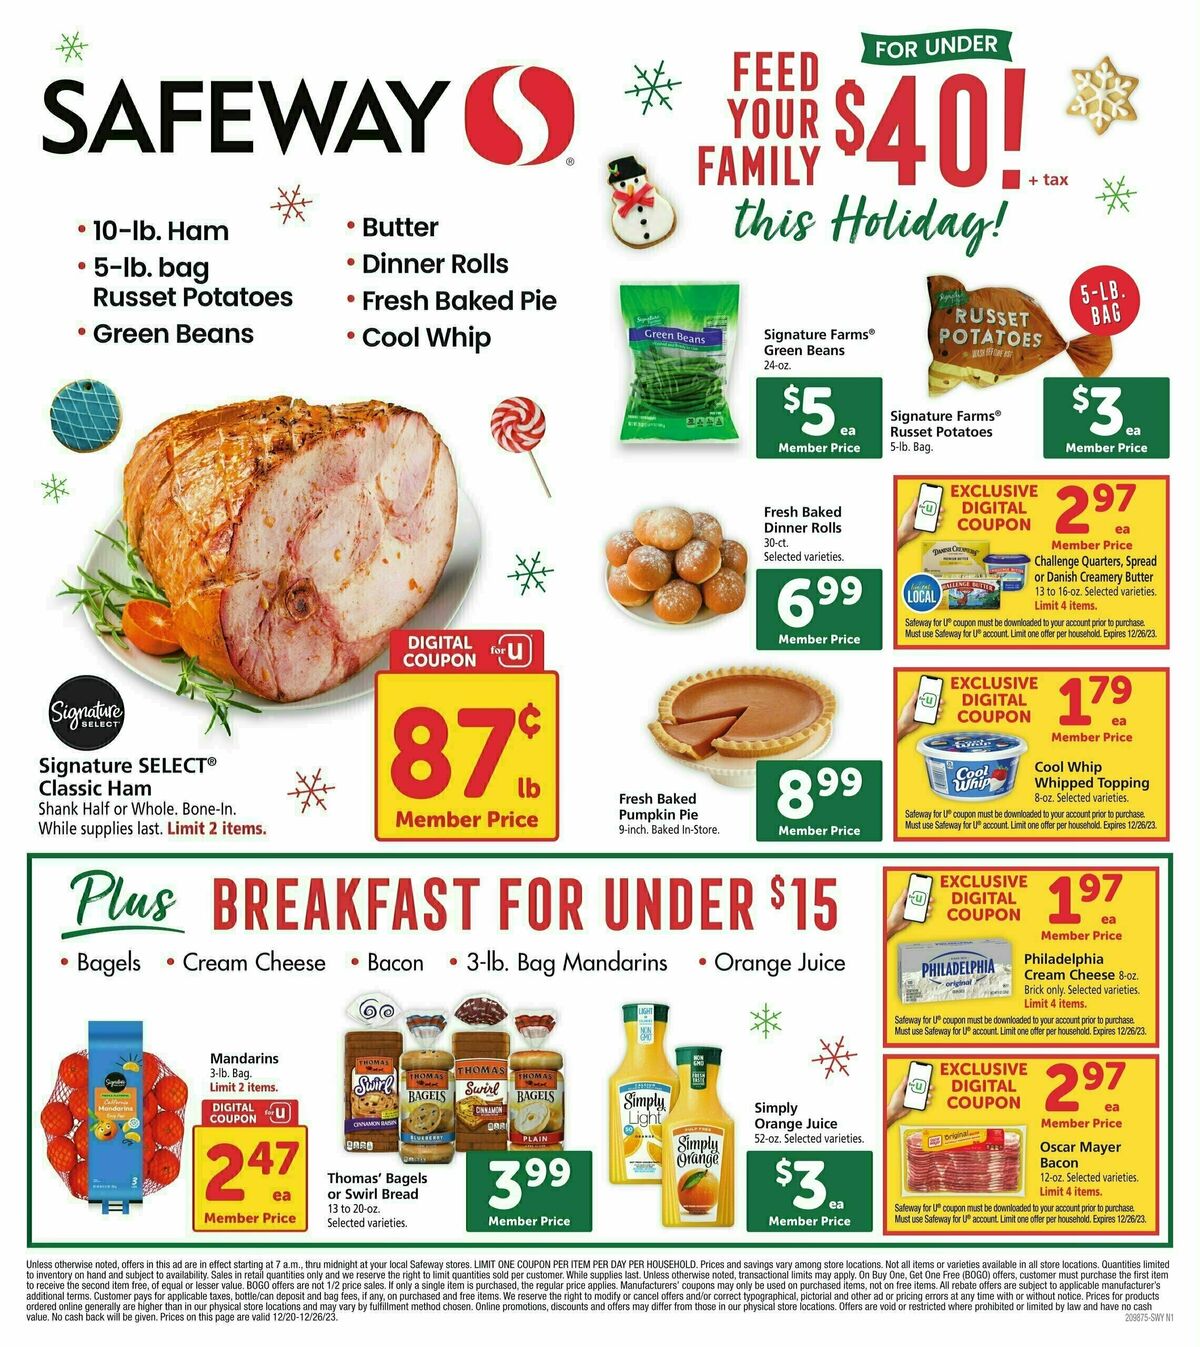 Safeway Specialty Publication Weekly Ad from December 20